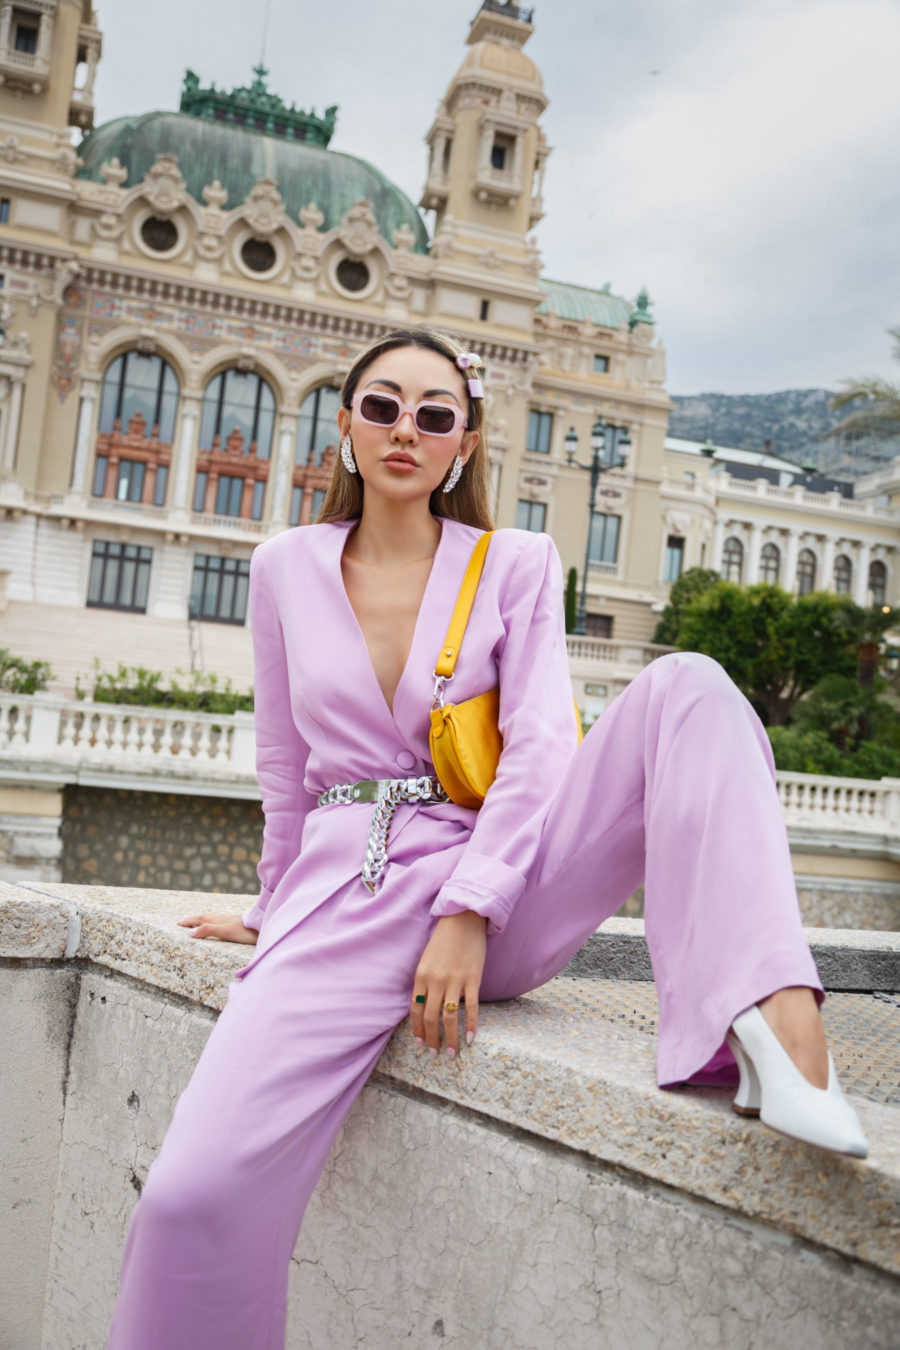 fashion blogger jessica wang wears lavender suit showcasing spring color trends // Jessica Wang - Notjessfashion.com